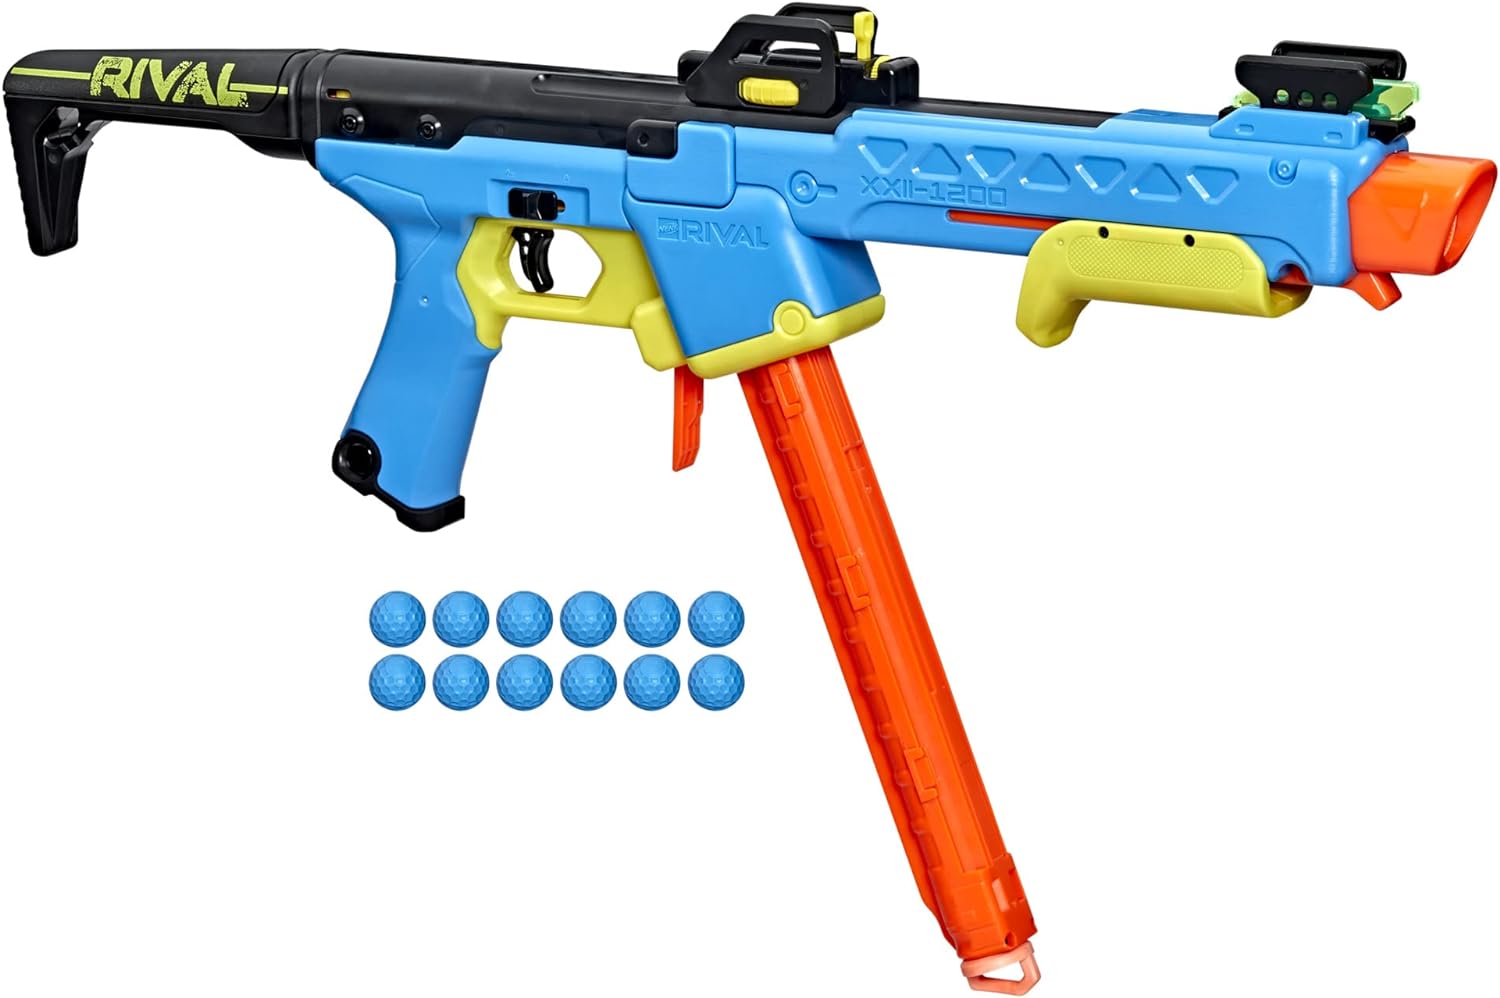 NERF Rival Pathfinder XXII-1200 Blaster, Most Accurate Rival System, Adjustable Sight, 12-Round Magazine, 12 Rival Accu-Rounds